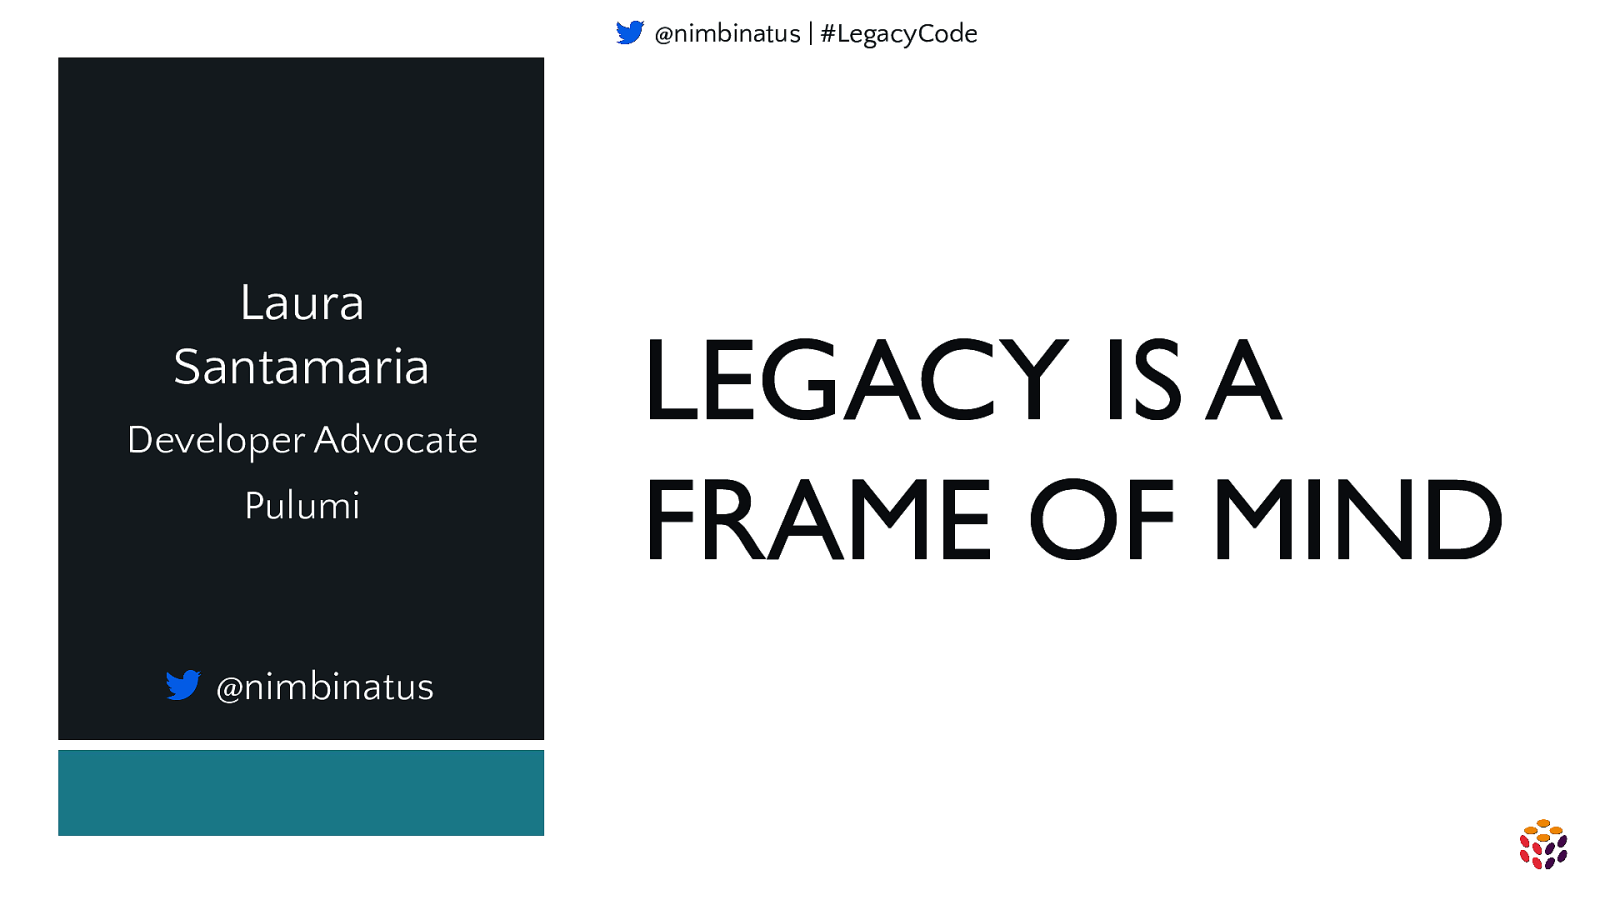 Legacy is a Frame of Mind